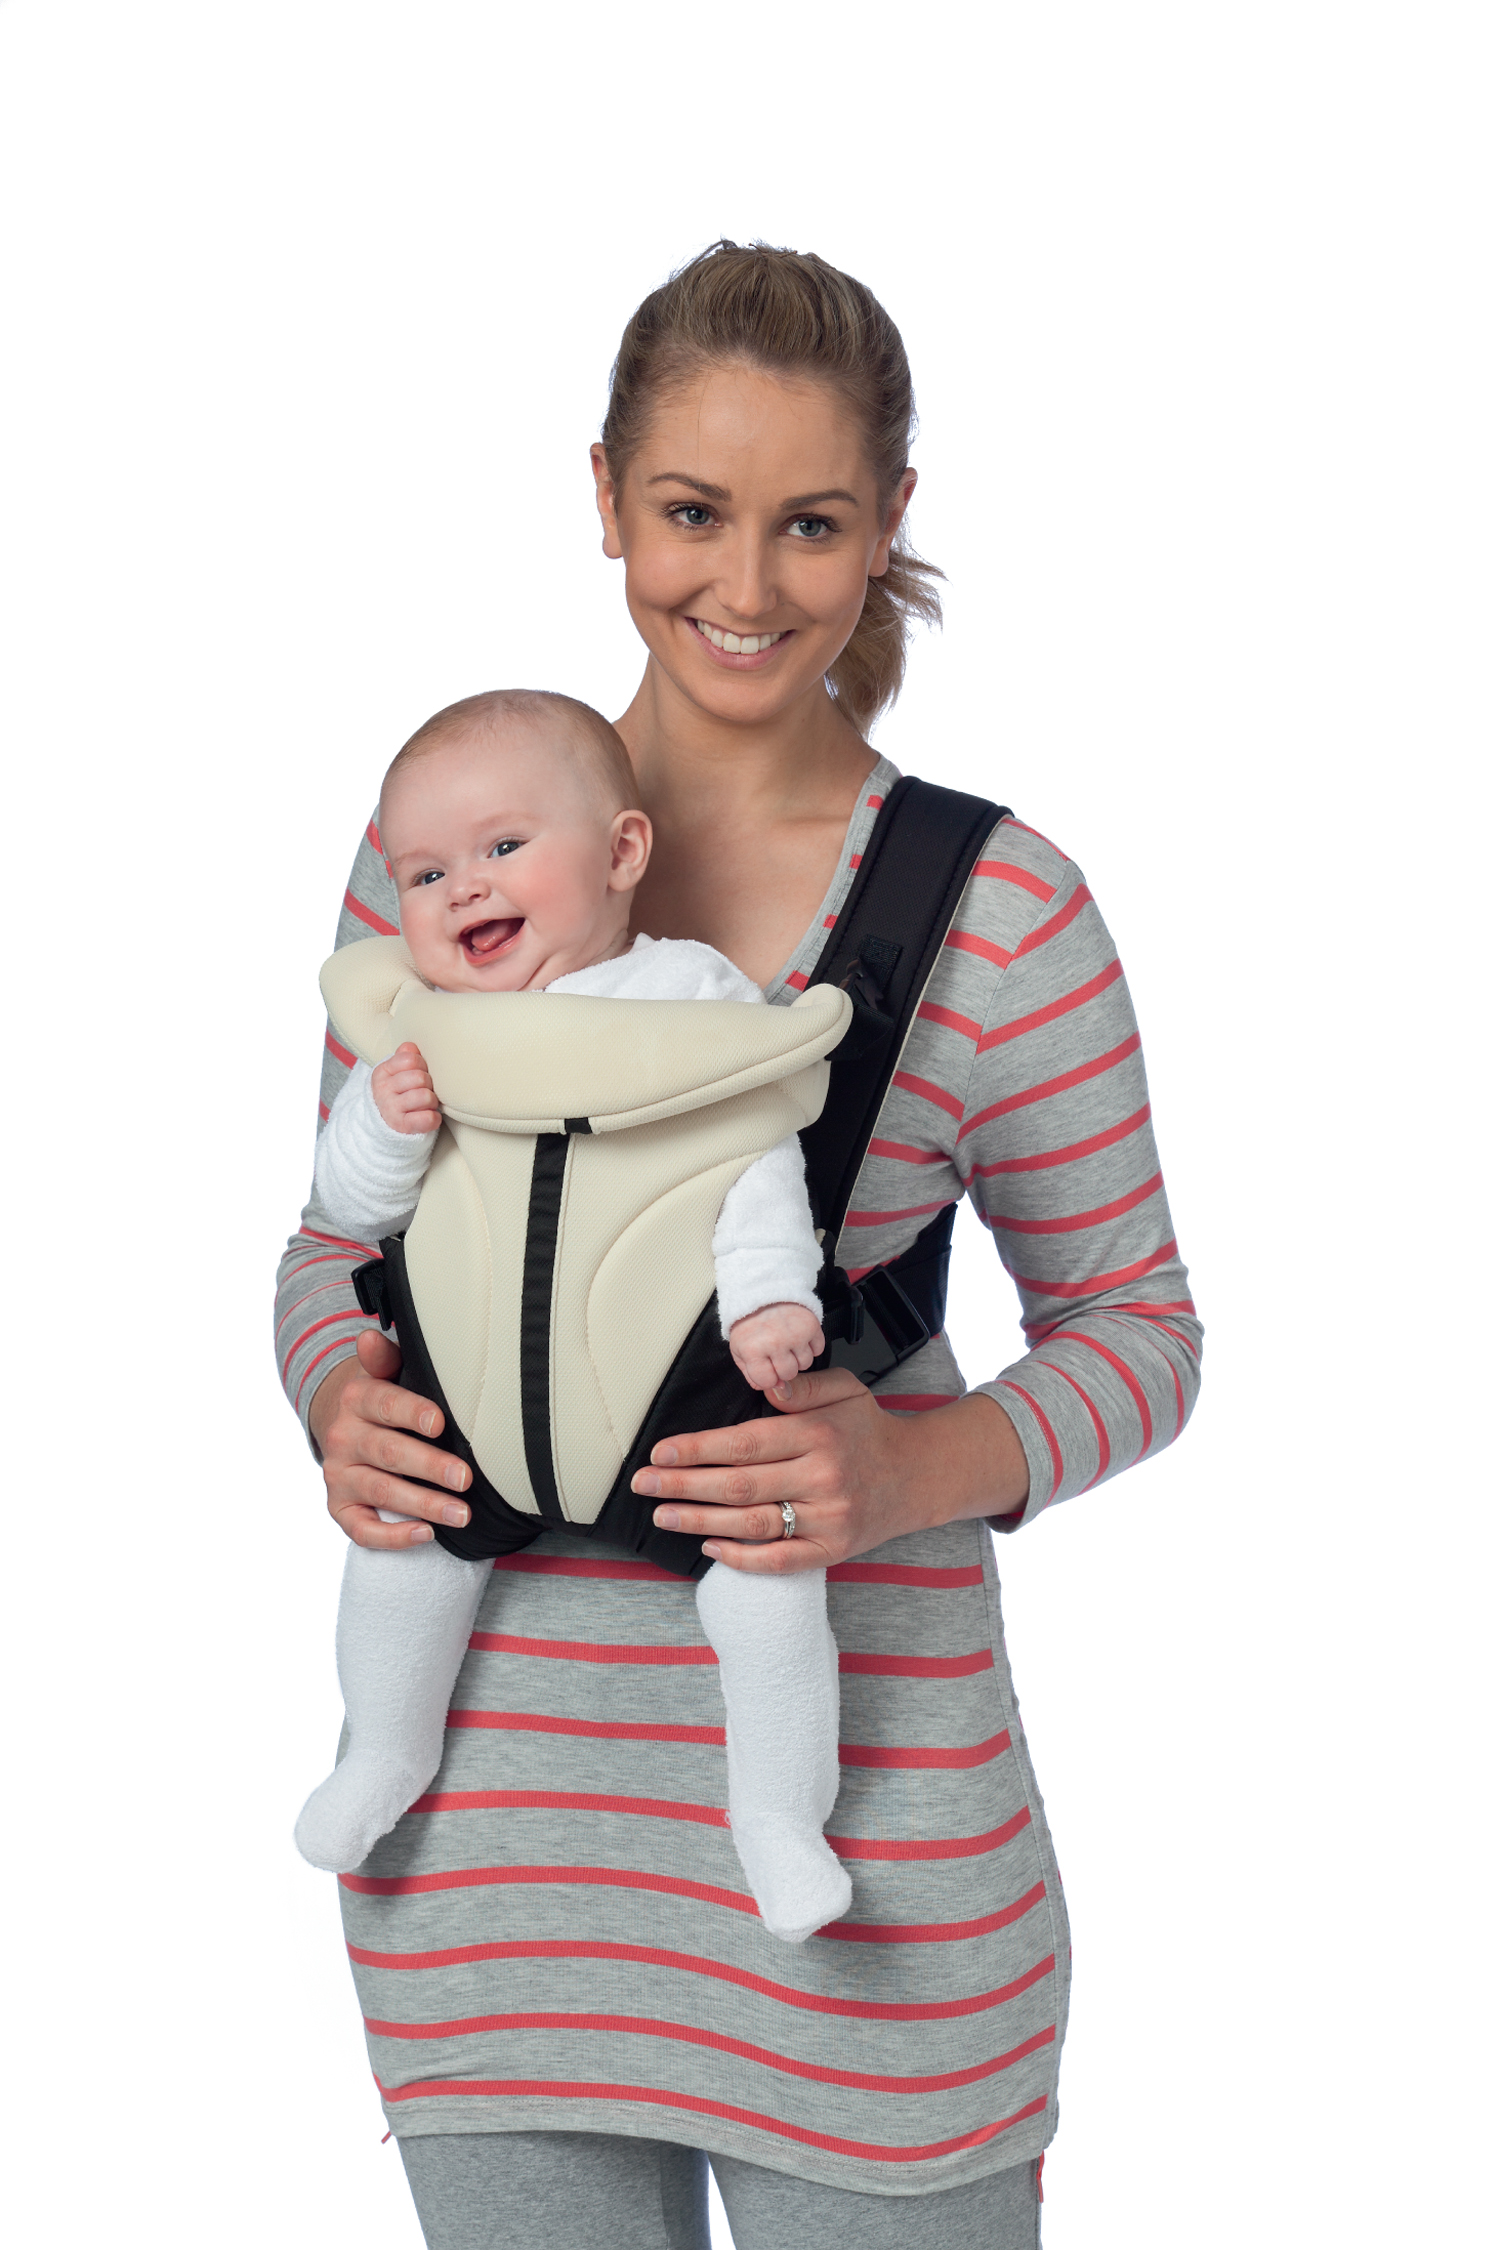 babylo 3 in 1 baby carrier instructions